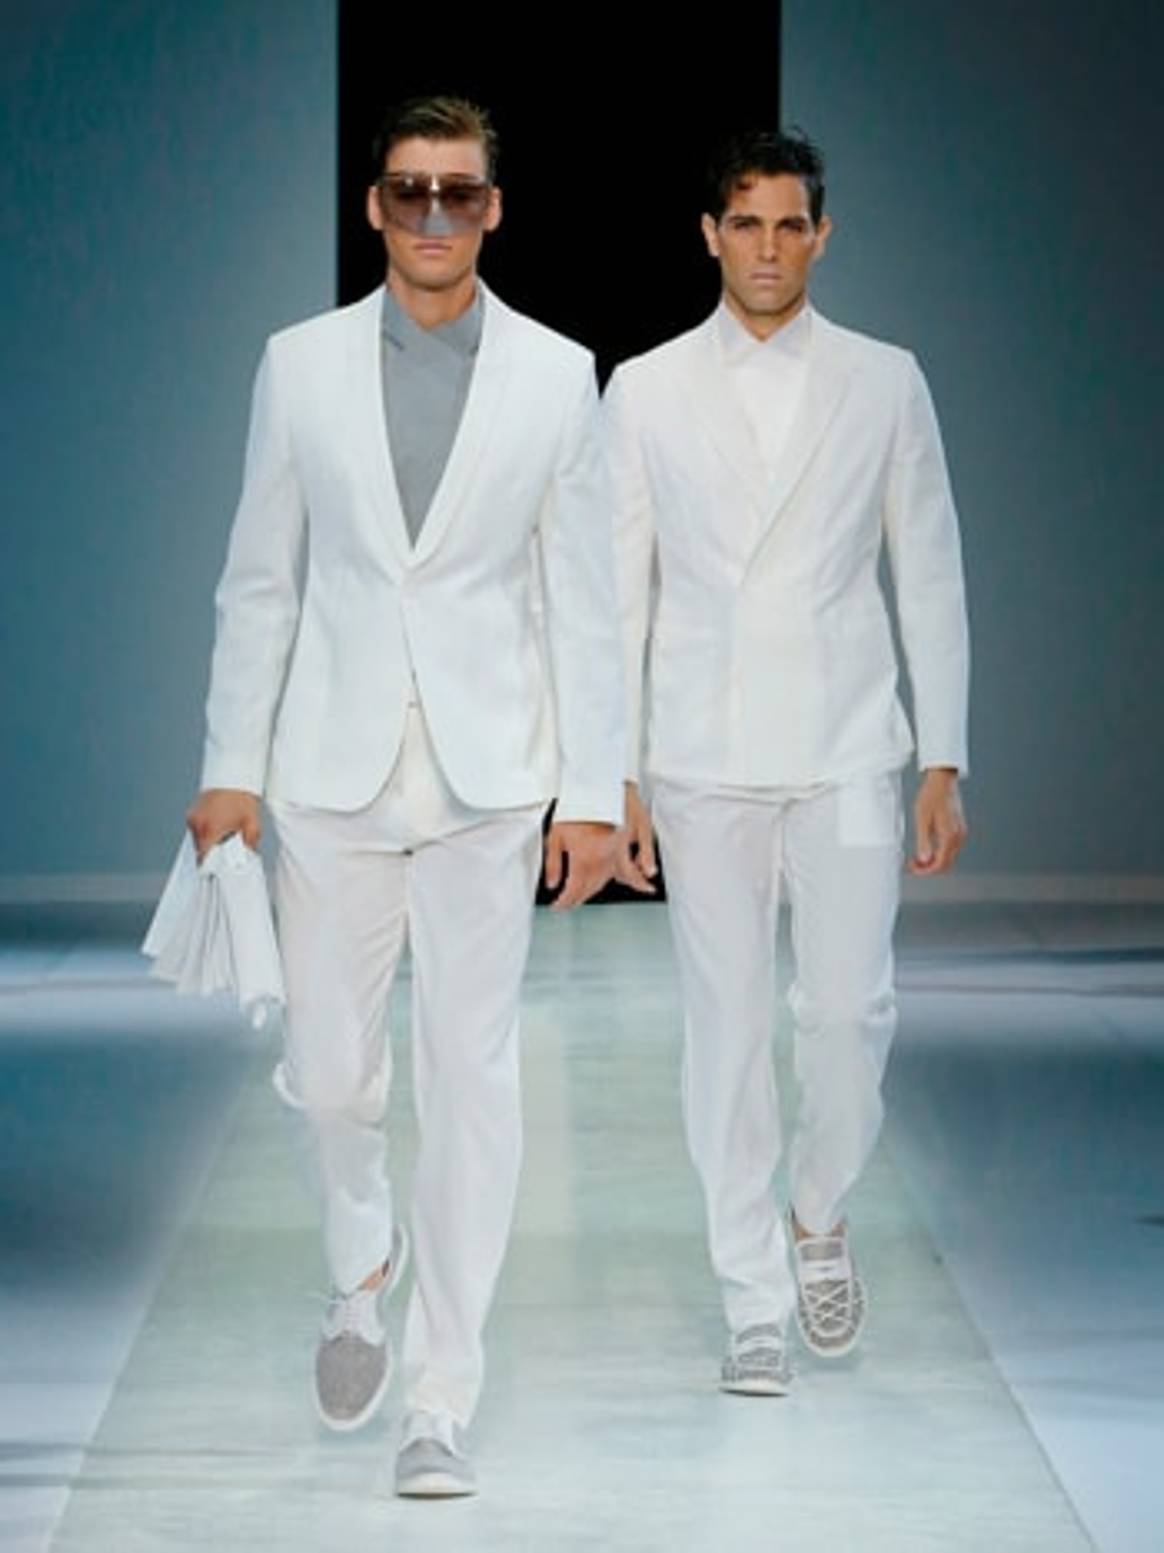 MFW and Pitti return to the catwalk with men’s fashion